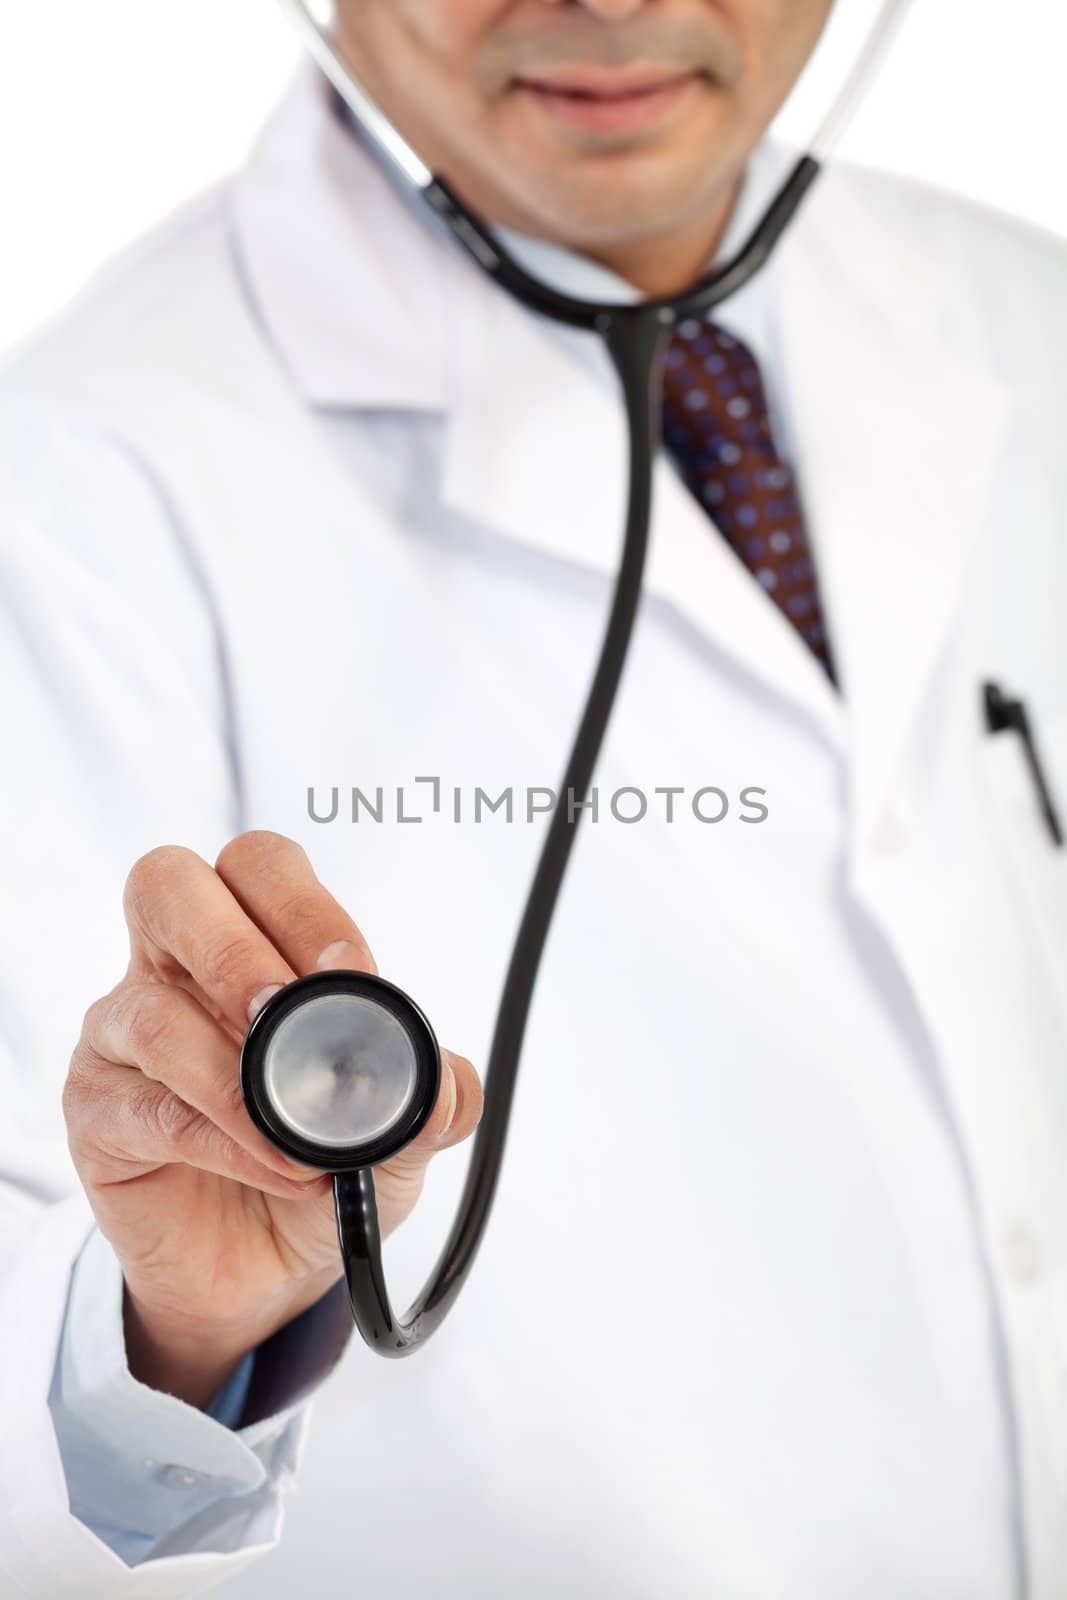 Mid section of a male doctor in lab coat holding a stethoscope. Focus on the stethoscope.